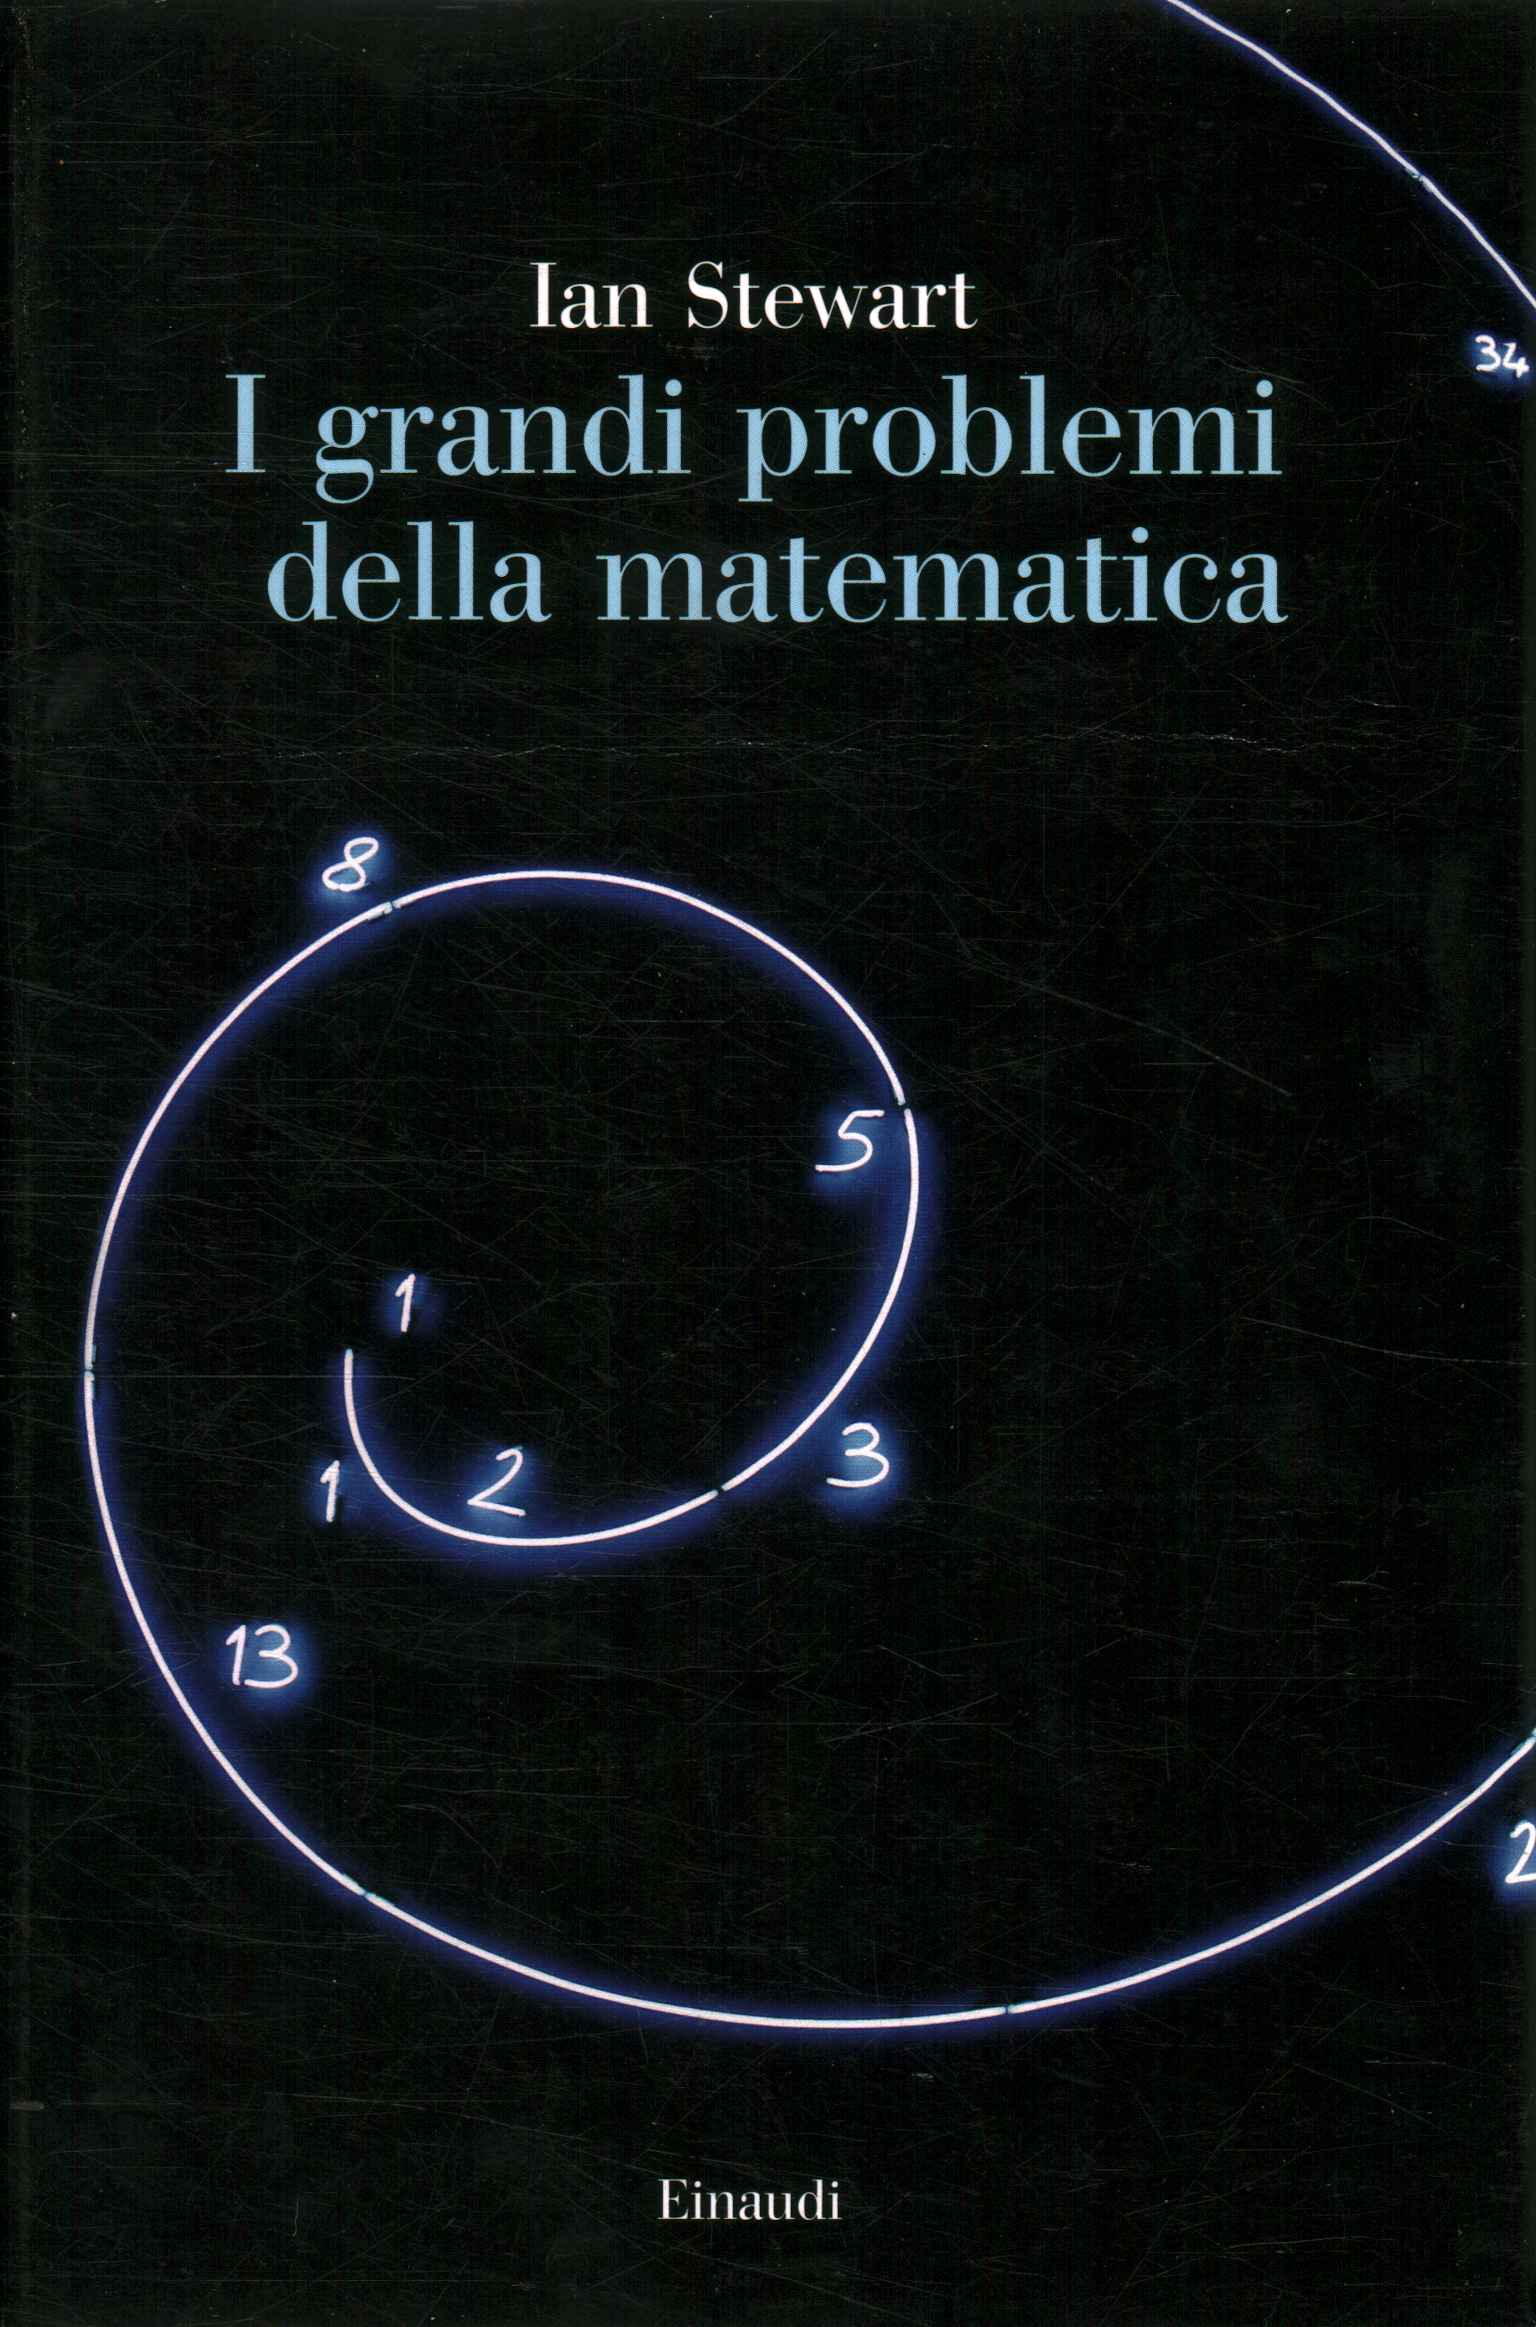 The great problems of mathematics